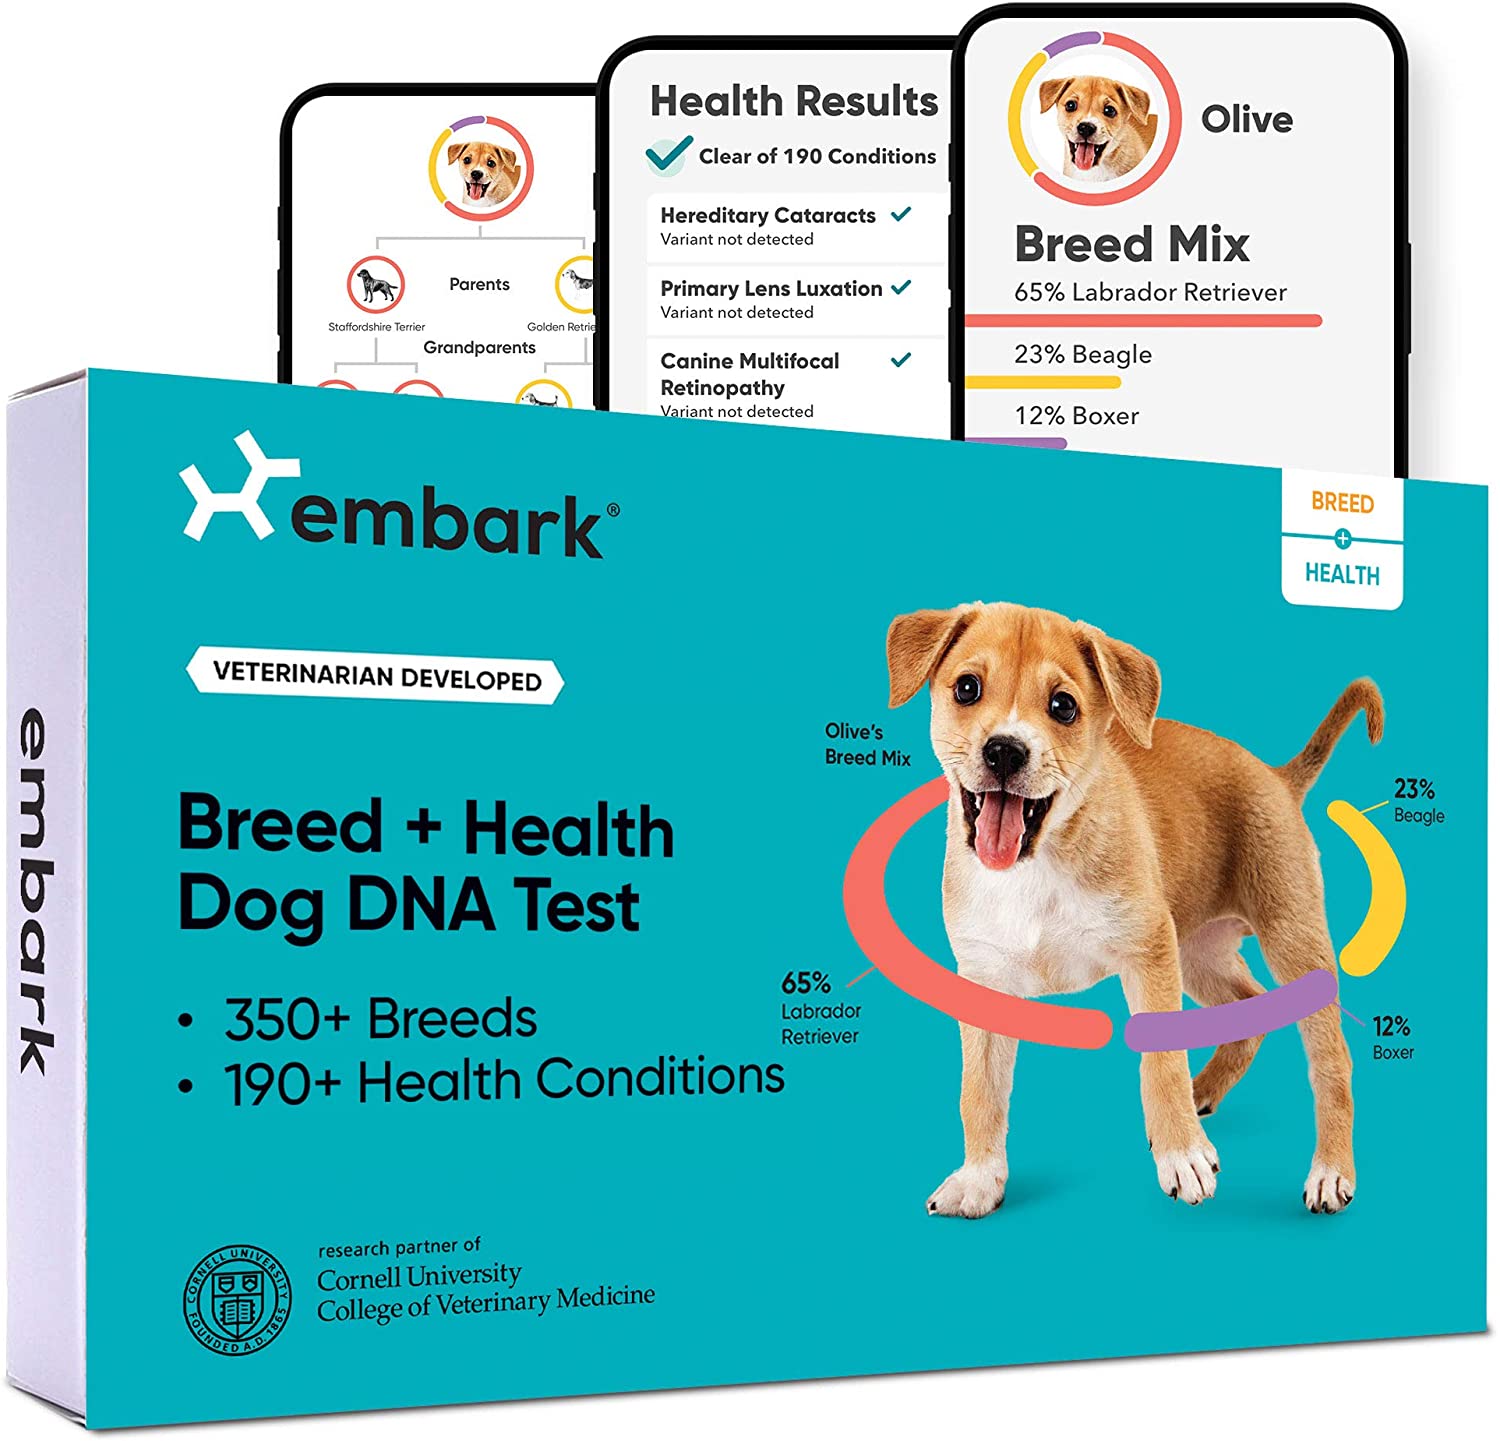 which is the least expensive dog dna test